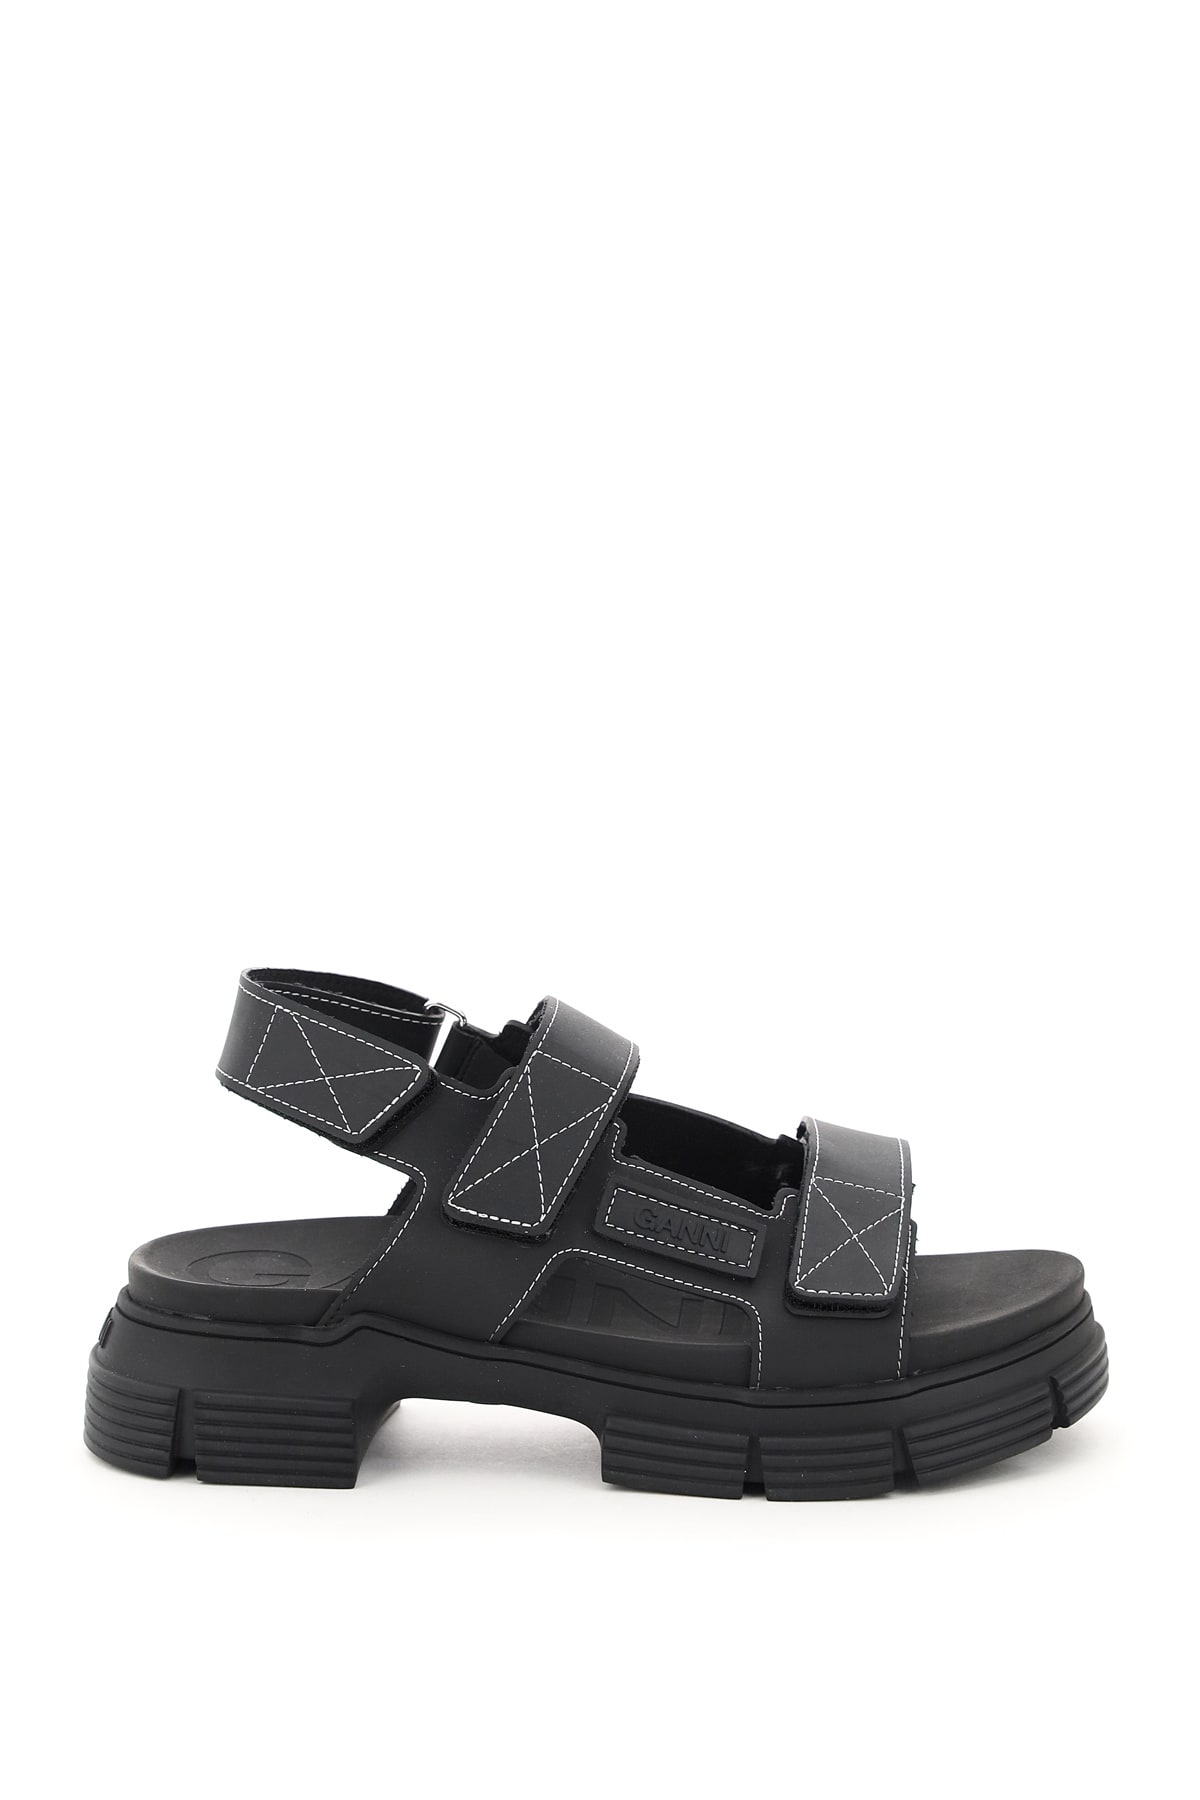 Ganni Recycled Rubber Sandals With Velcro